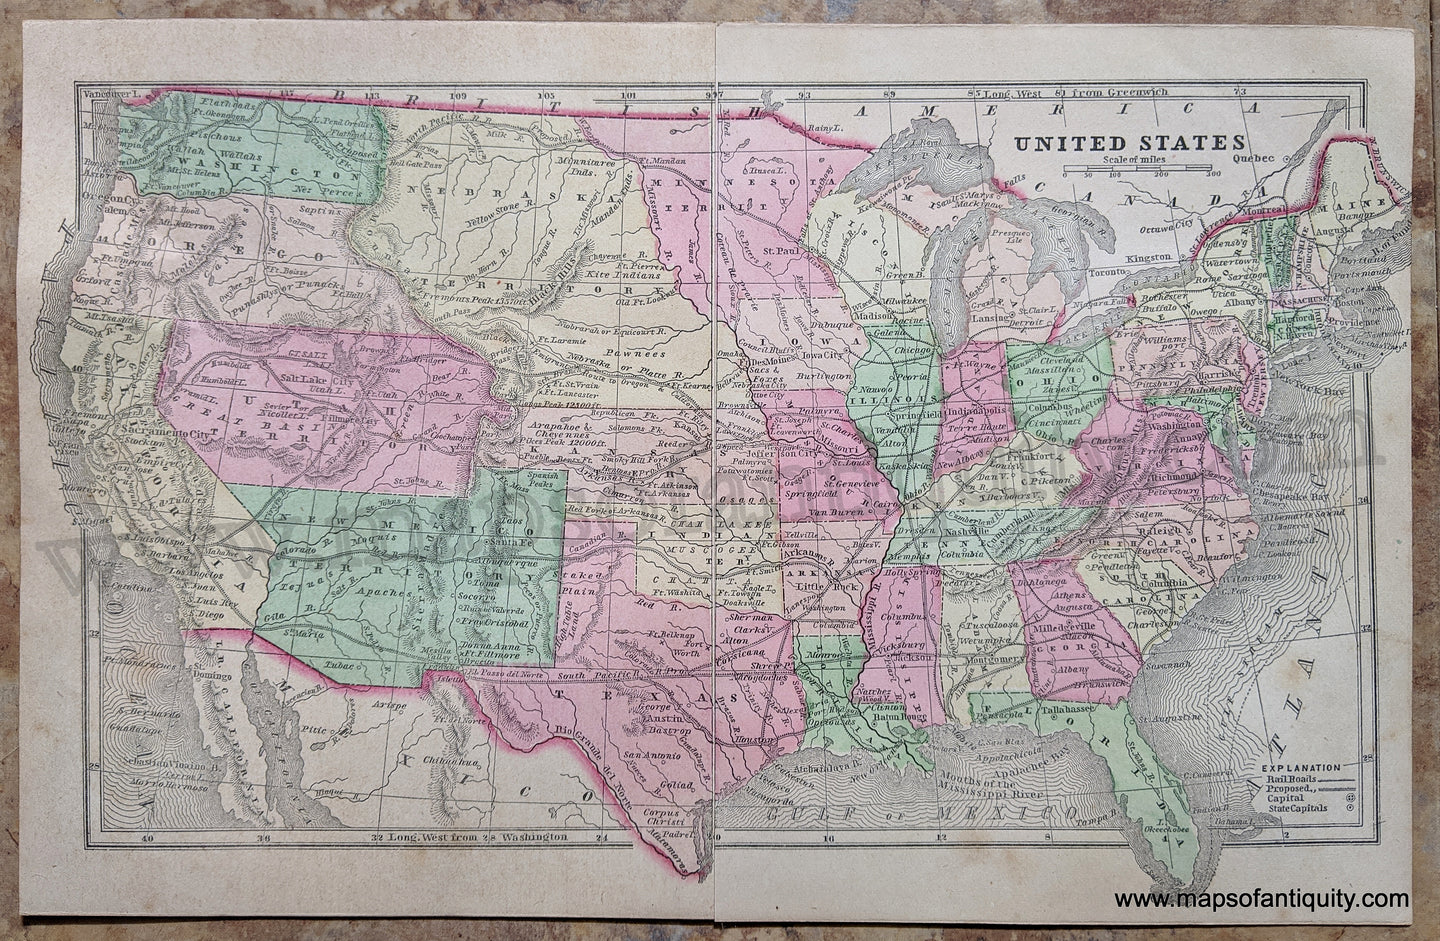 Antique-Hand-Colored-Map-United-States-United-States--1857-Morse-and-Gaston-Maps-Of-Antiquity-1800s-19th-century